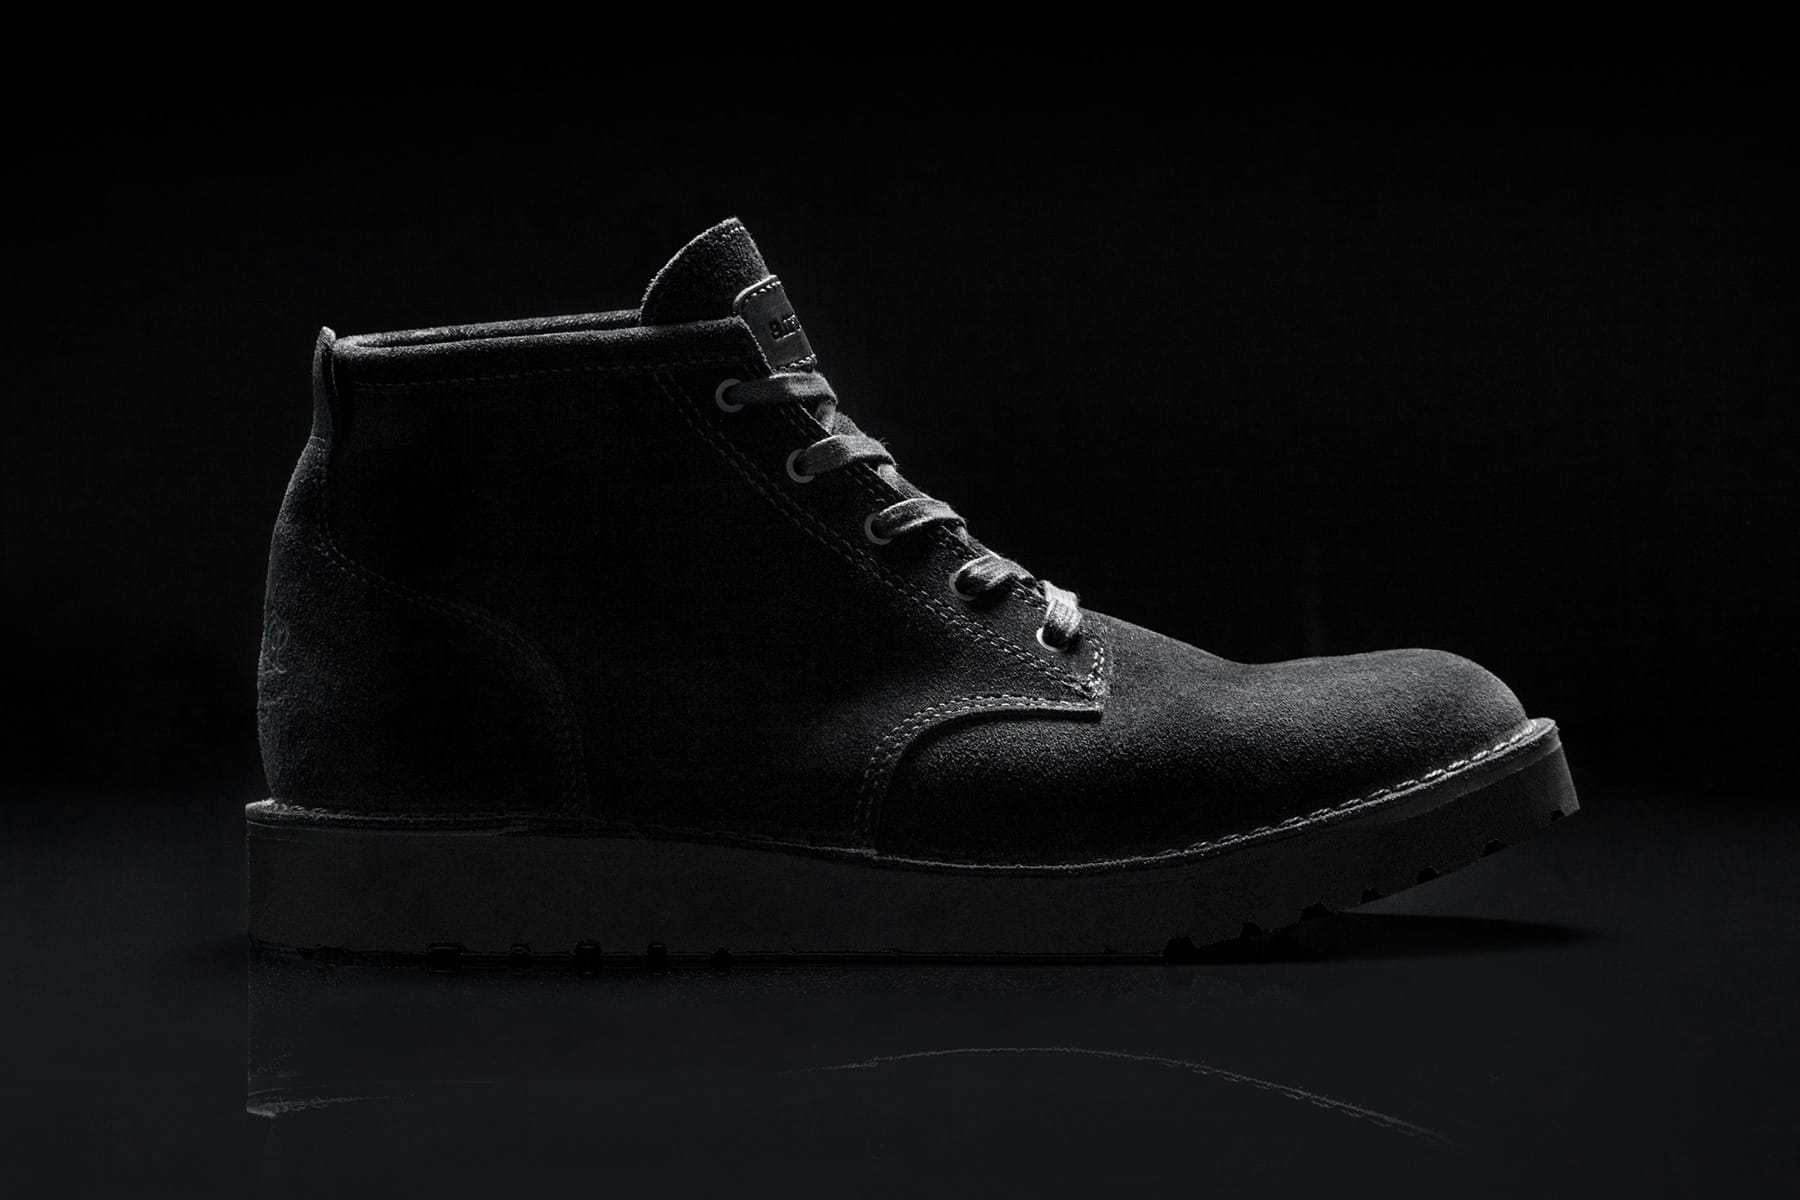 wings+horns x Danner Forest Heights II Boot | HYPEBEAST